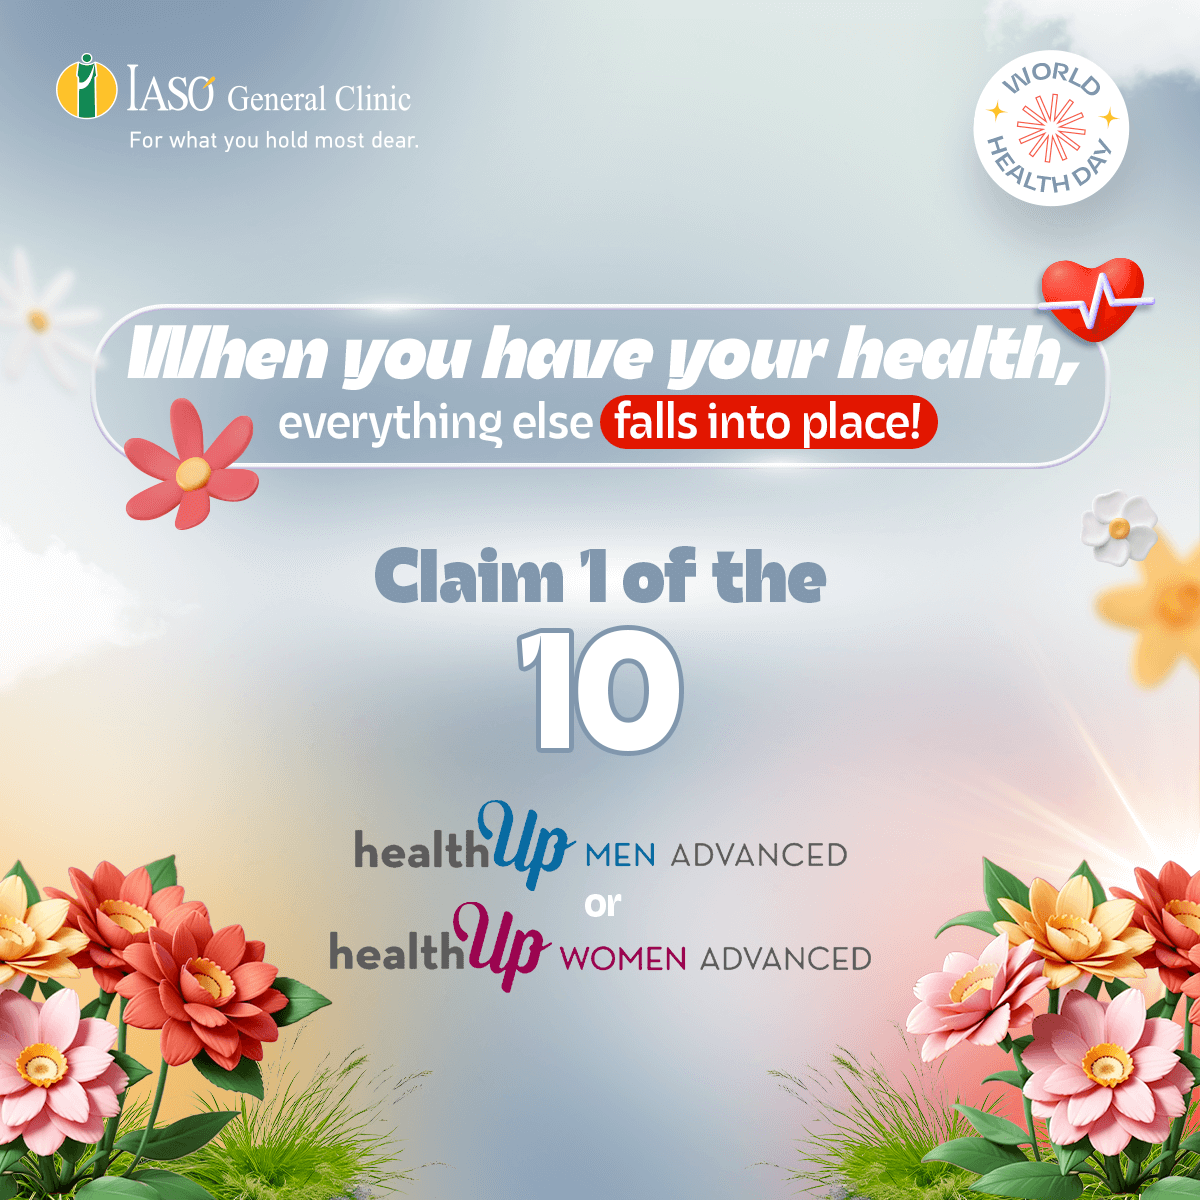 IASO General Clinic: “When you have your health, everything else falls into place” Contest on Instagram with 10 checkups as a gift on the occasion of World Health Day